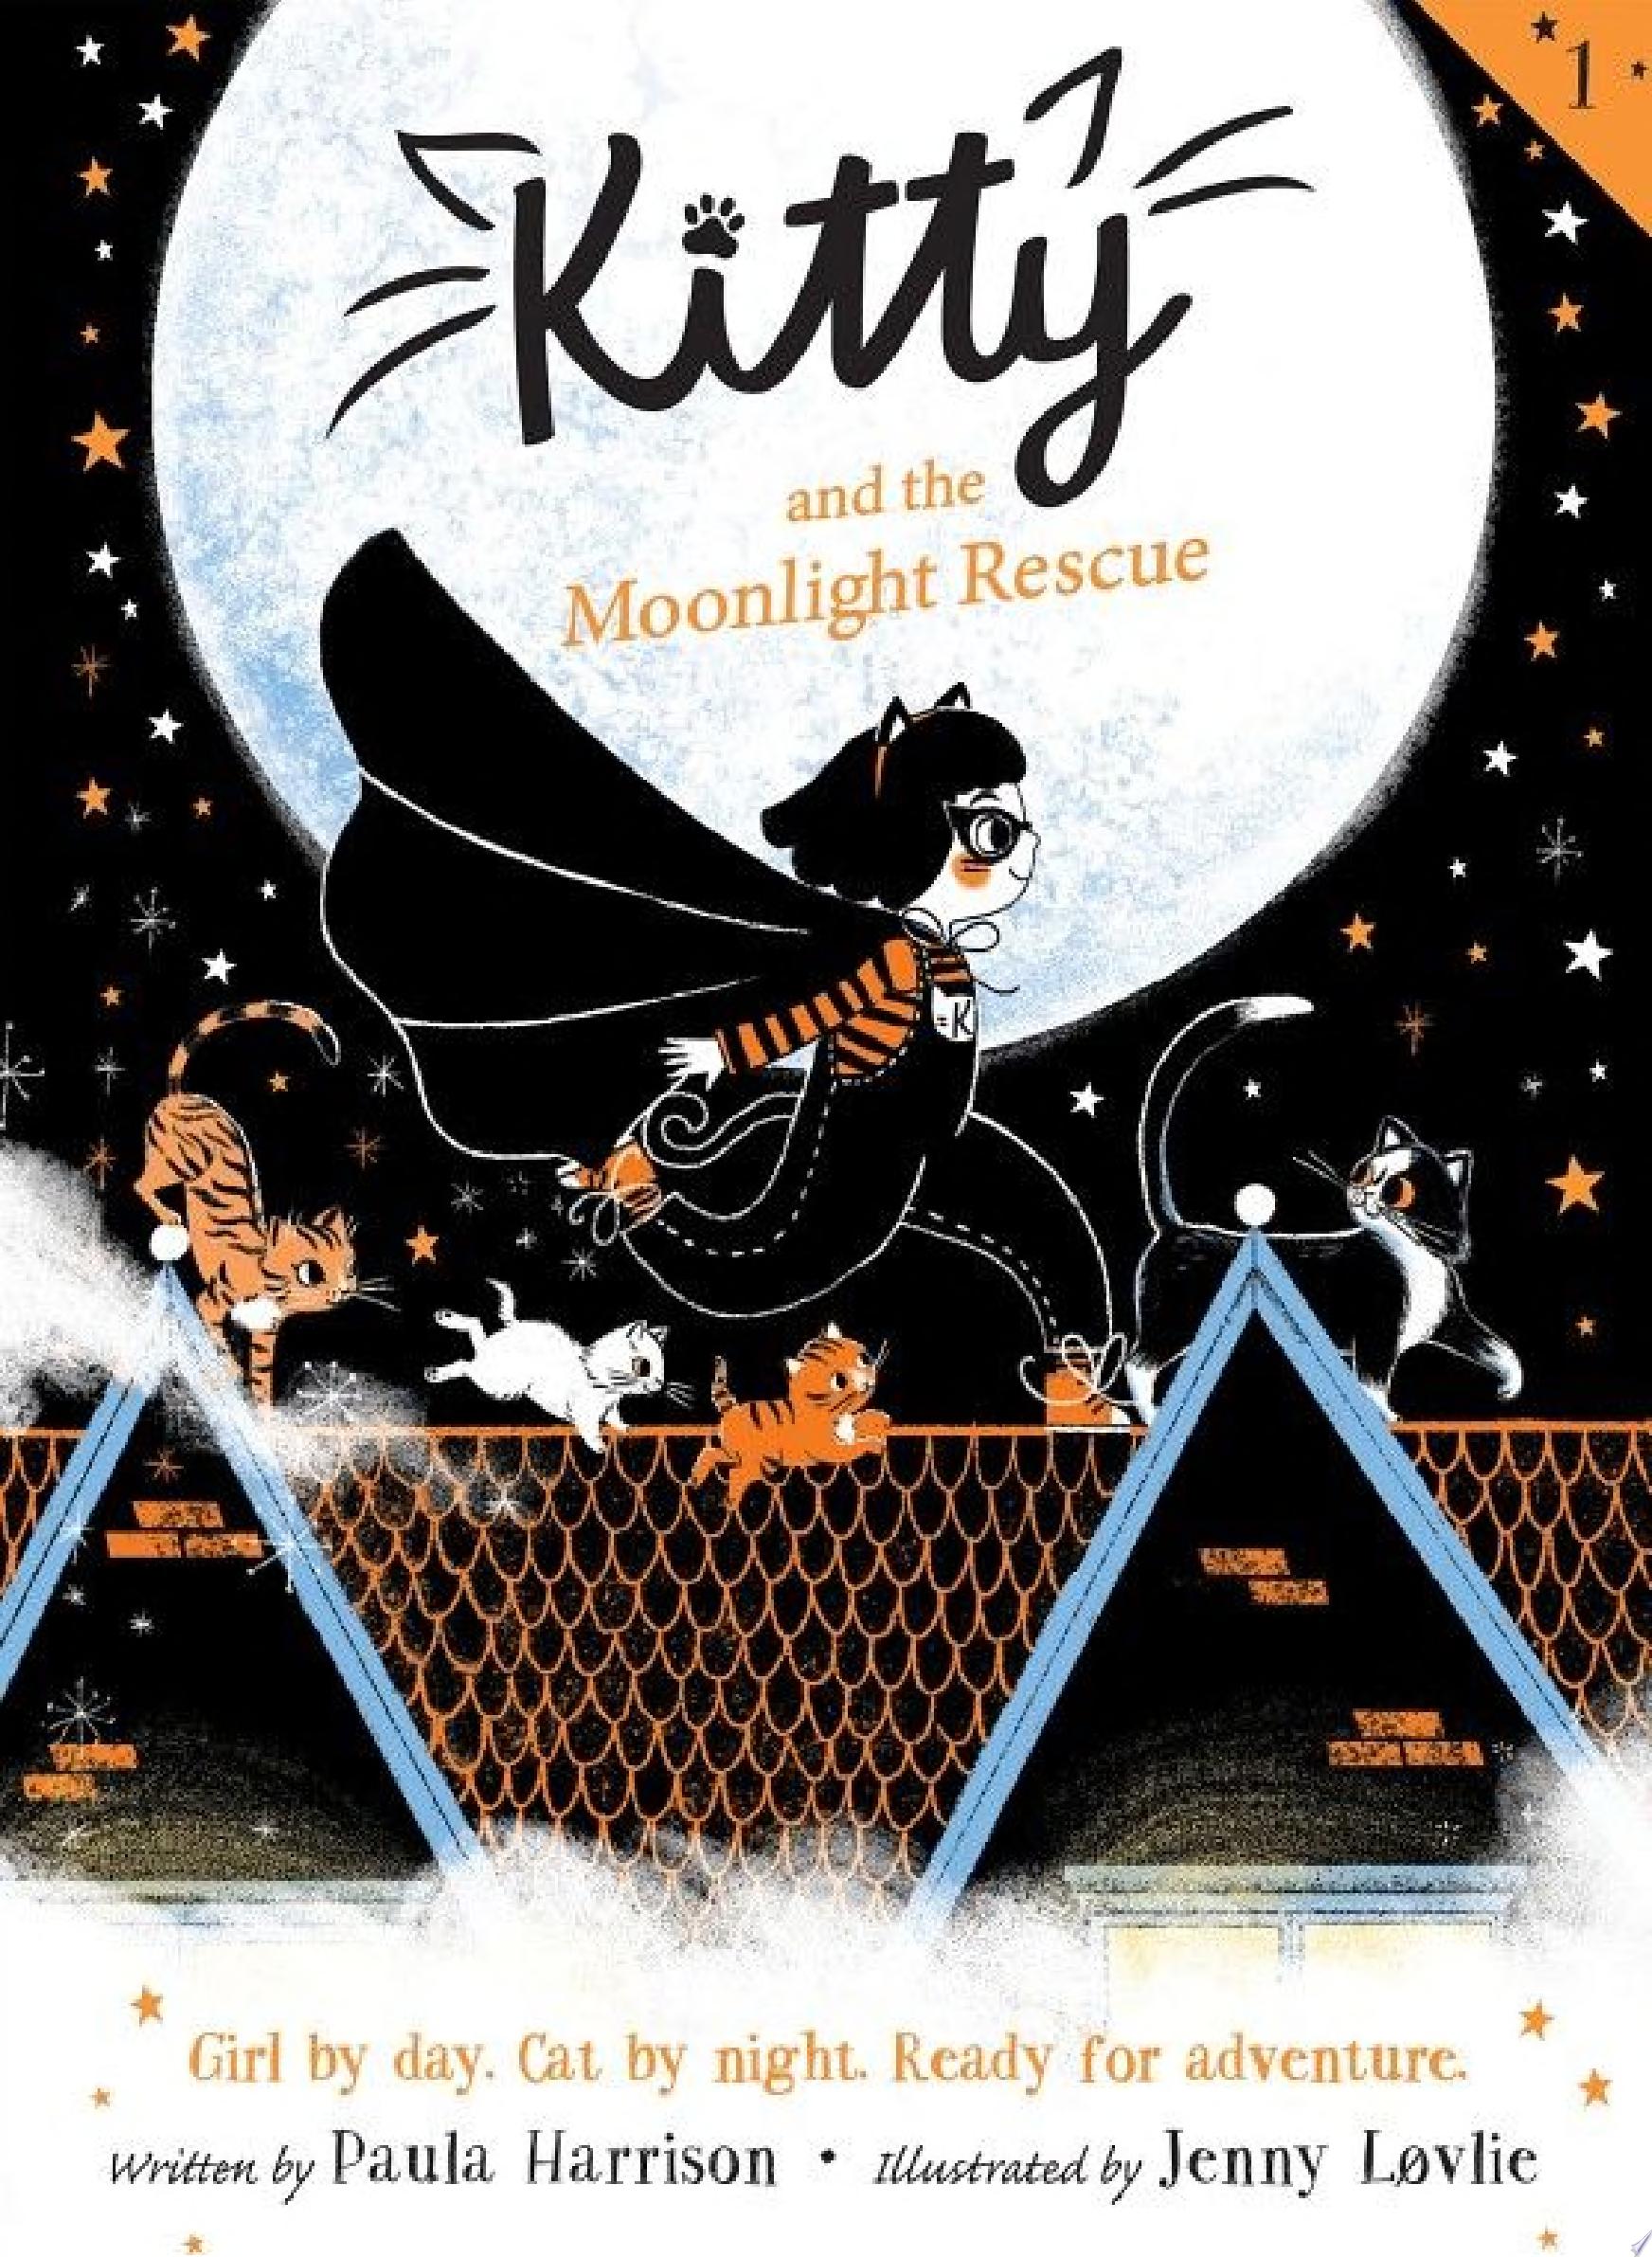 Image for "Kitty and the Moonlight Rescue"